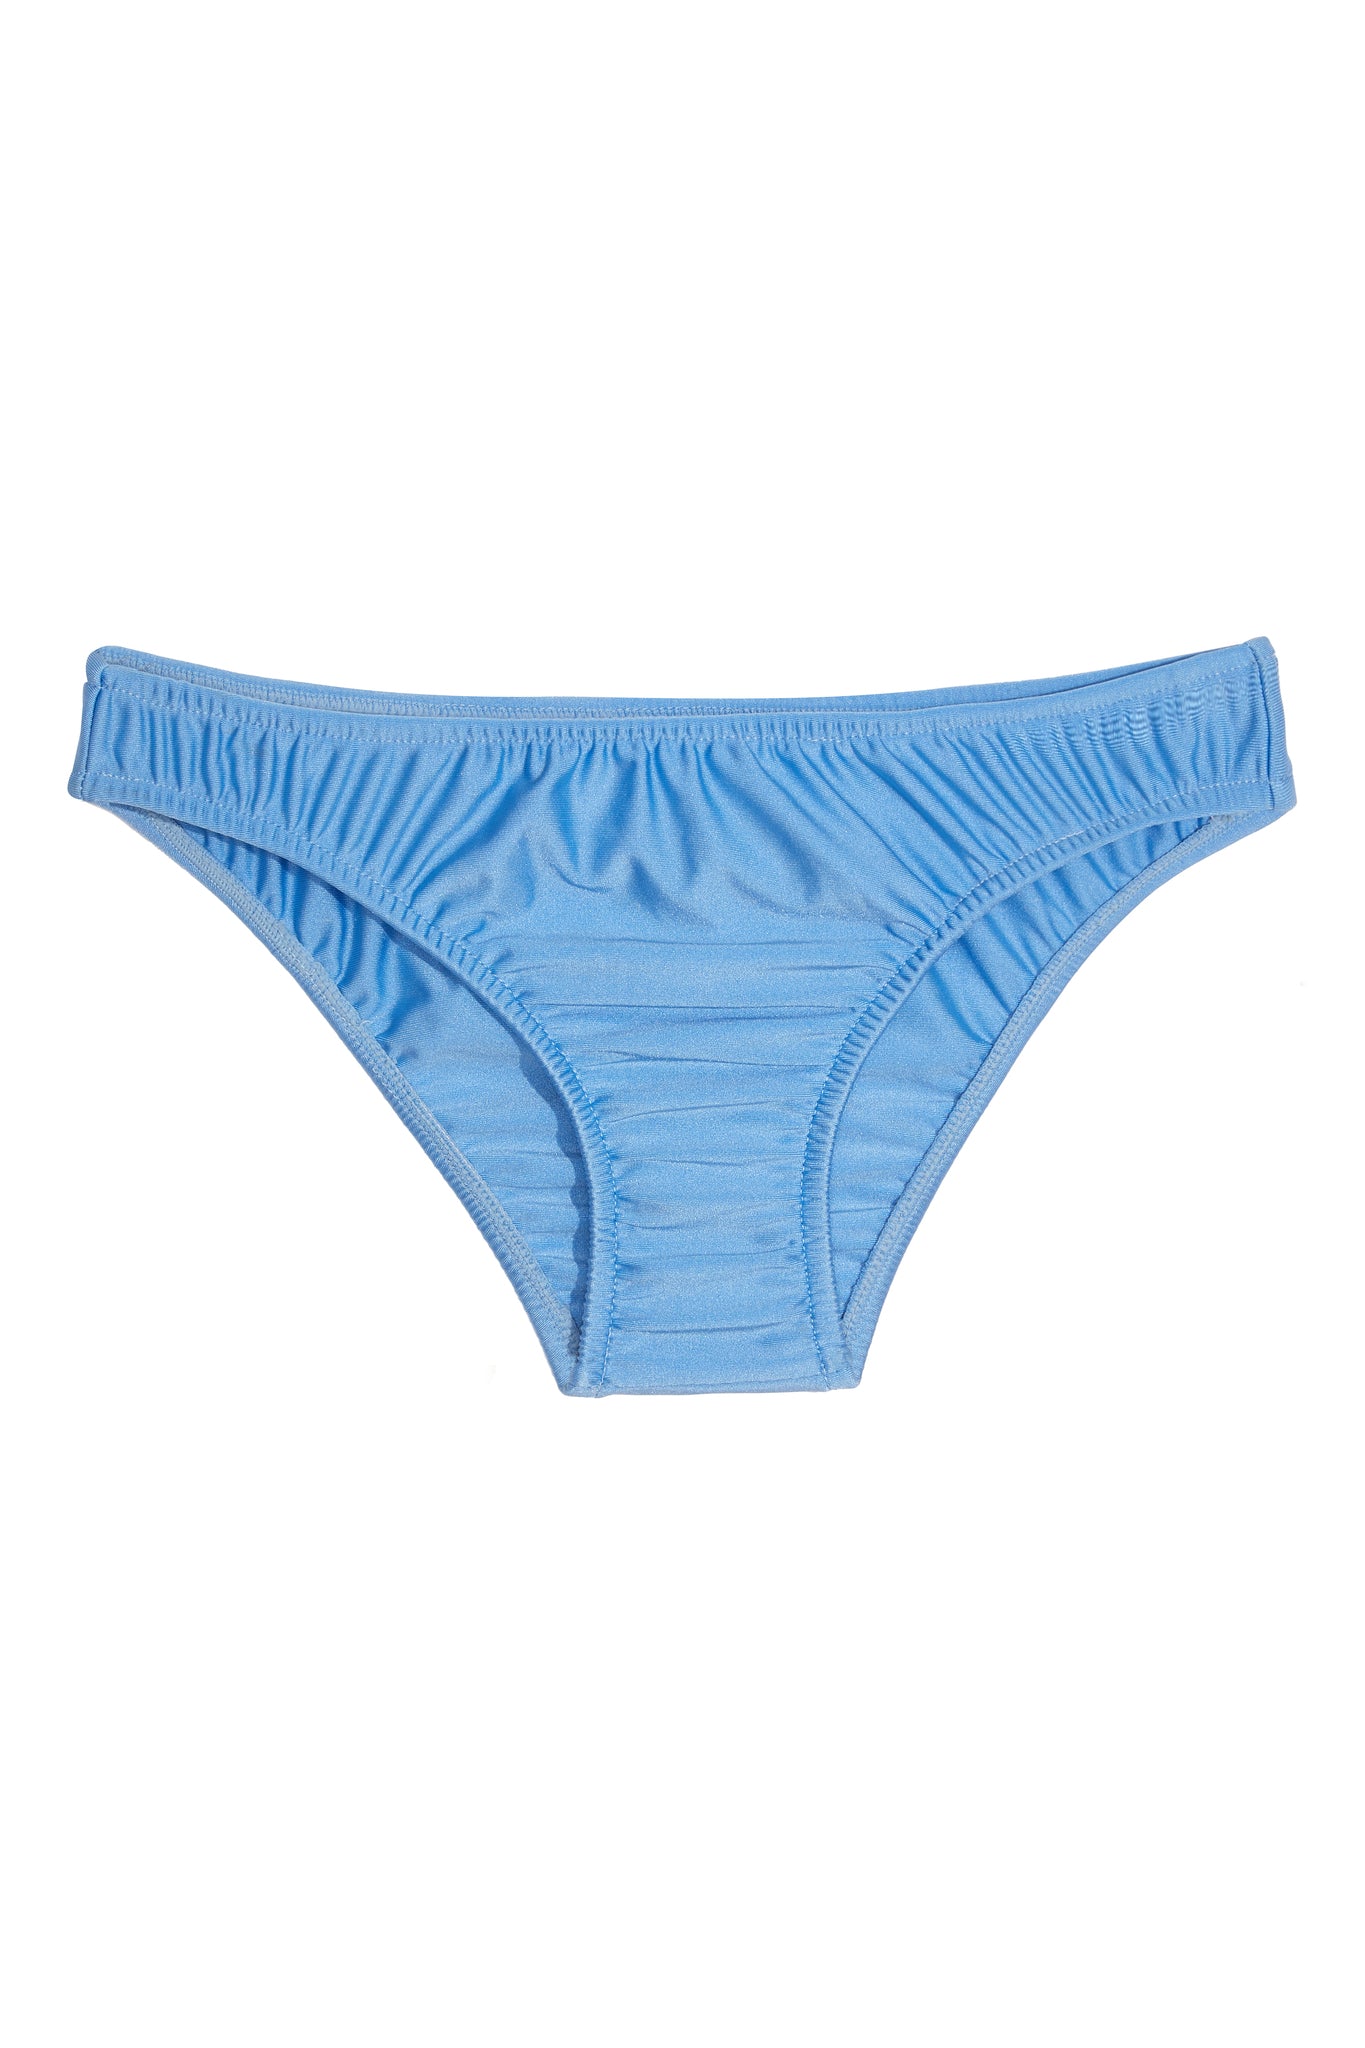 Vice Bottom in French Blue